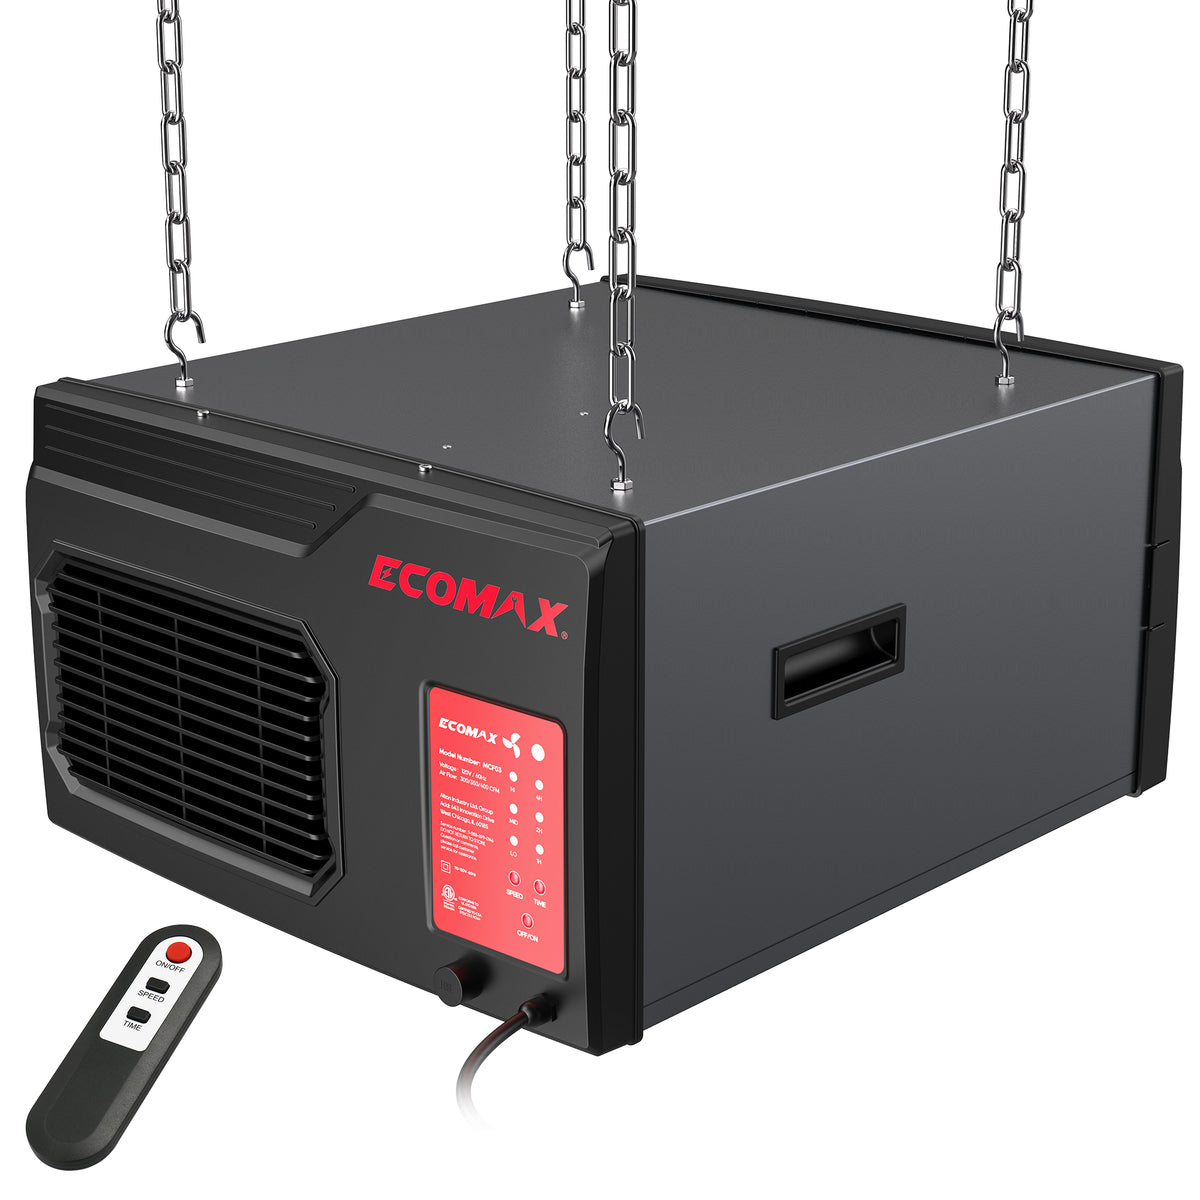 Ecomax Hanging Air Filtration System